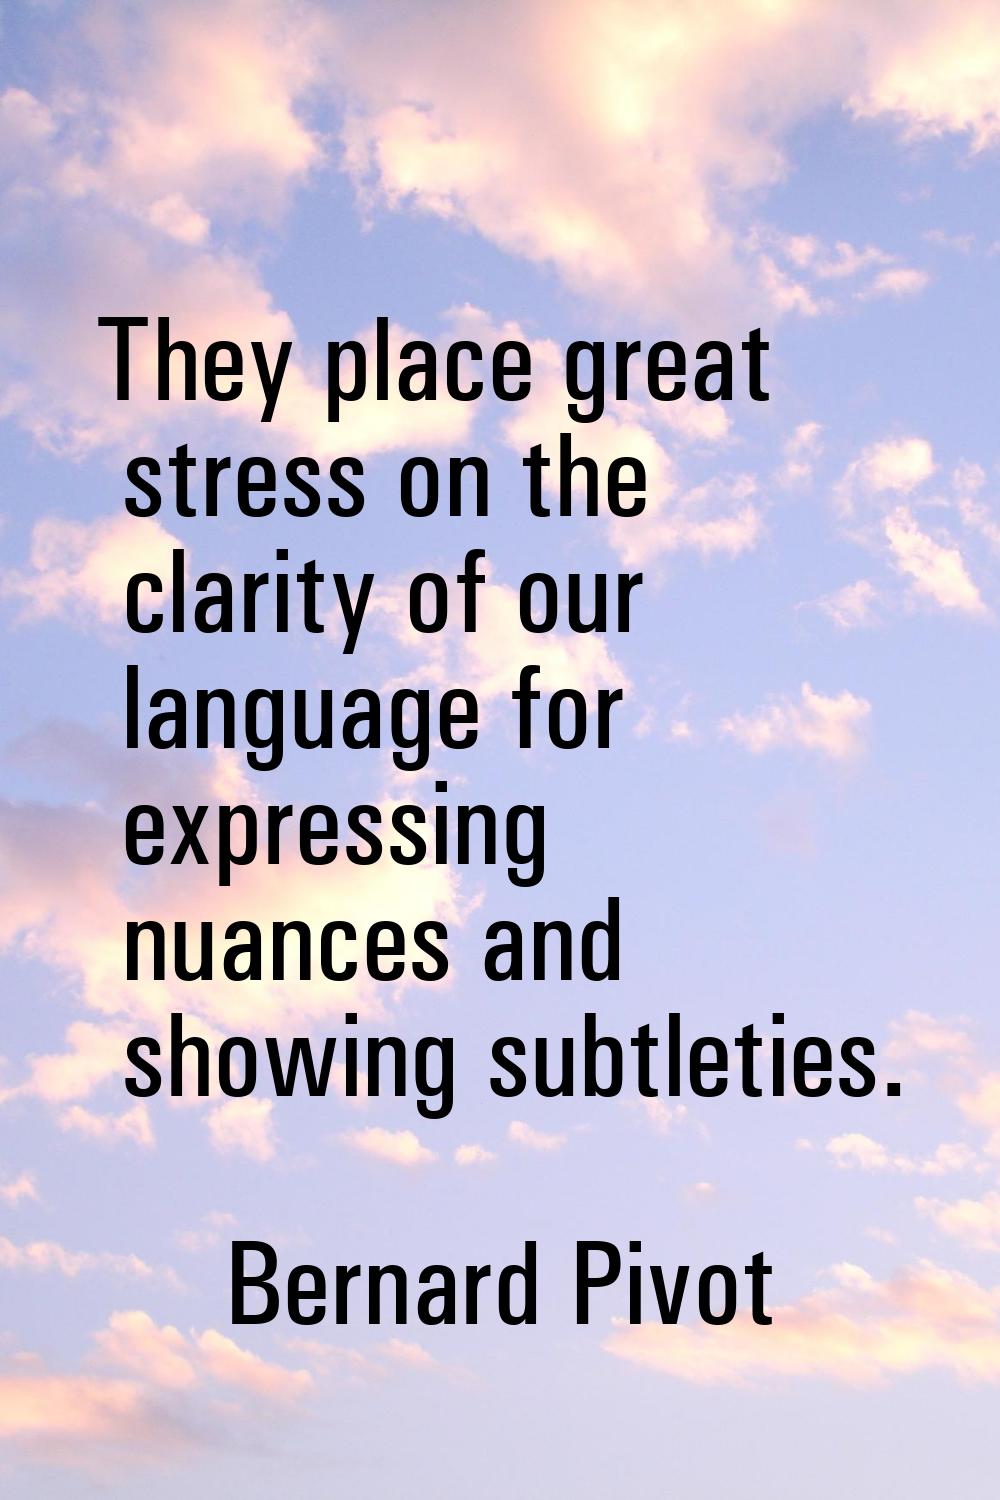 They place great stress on the clarity of our language for expressing nuances and showing subtletie